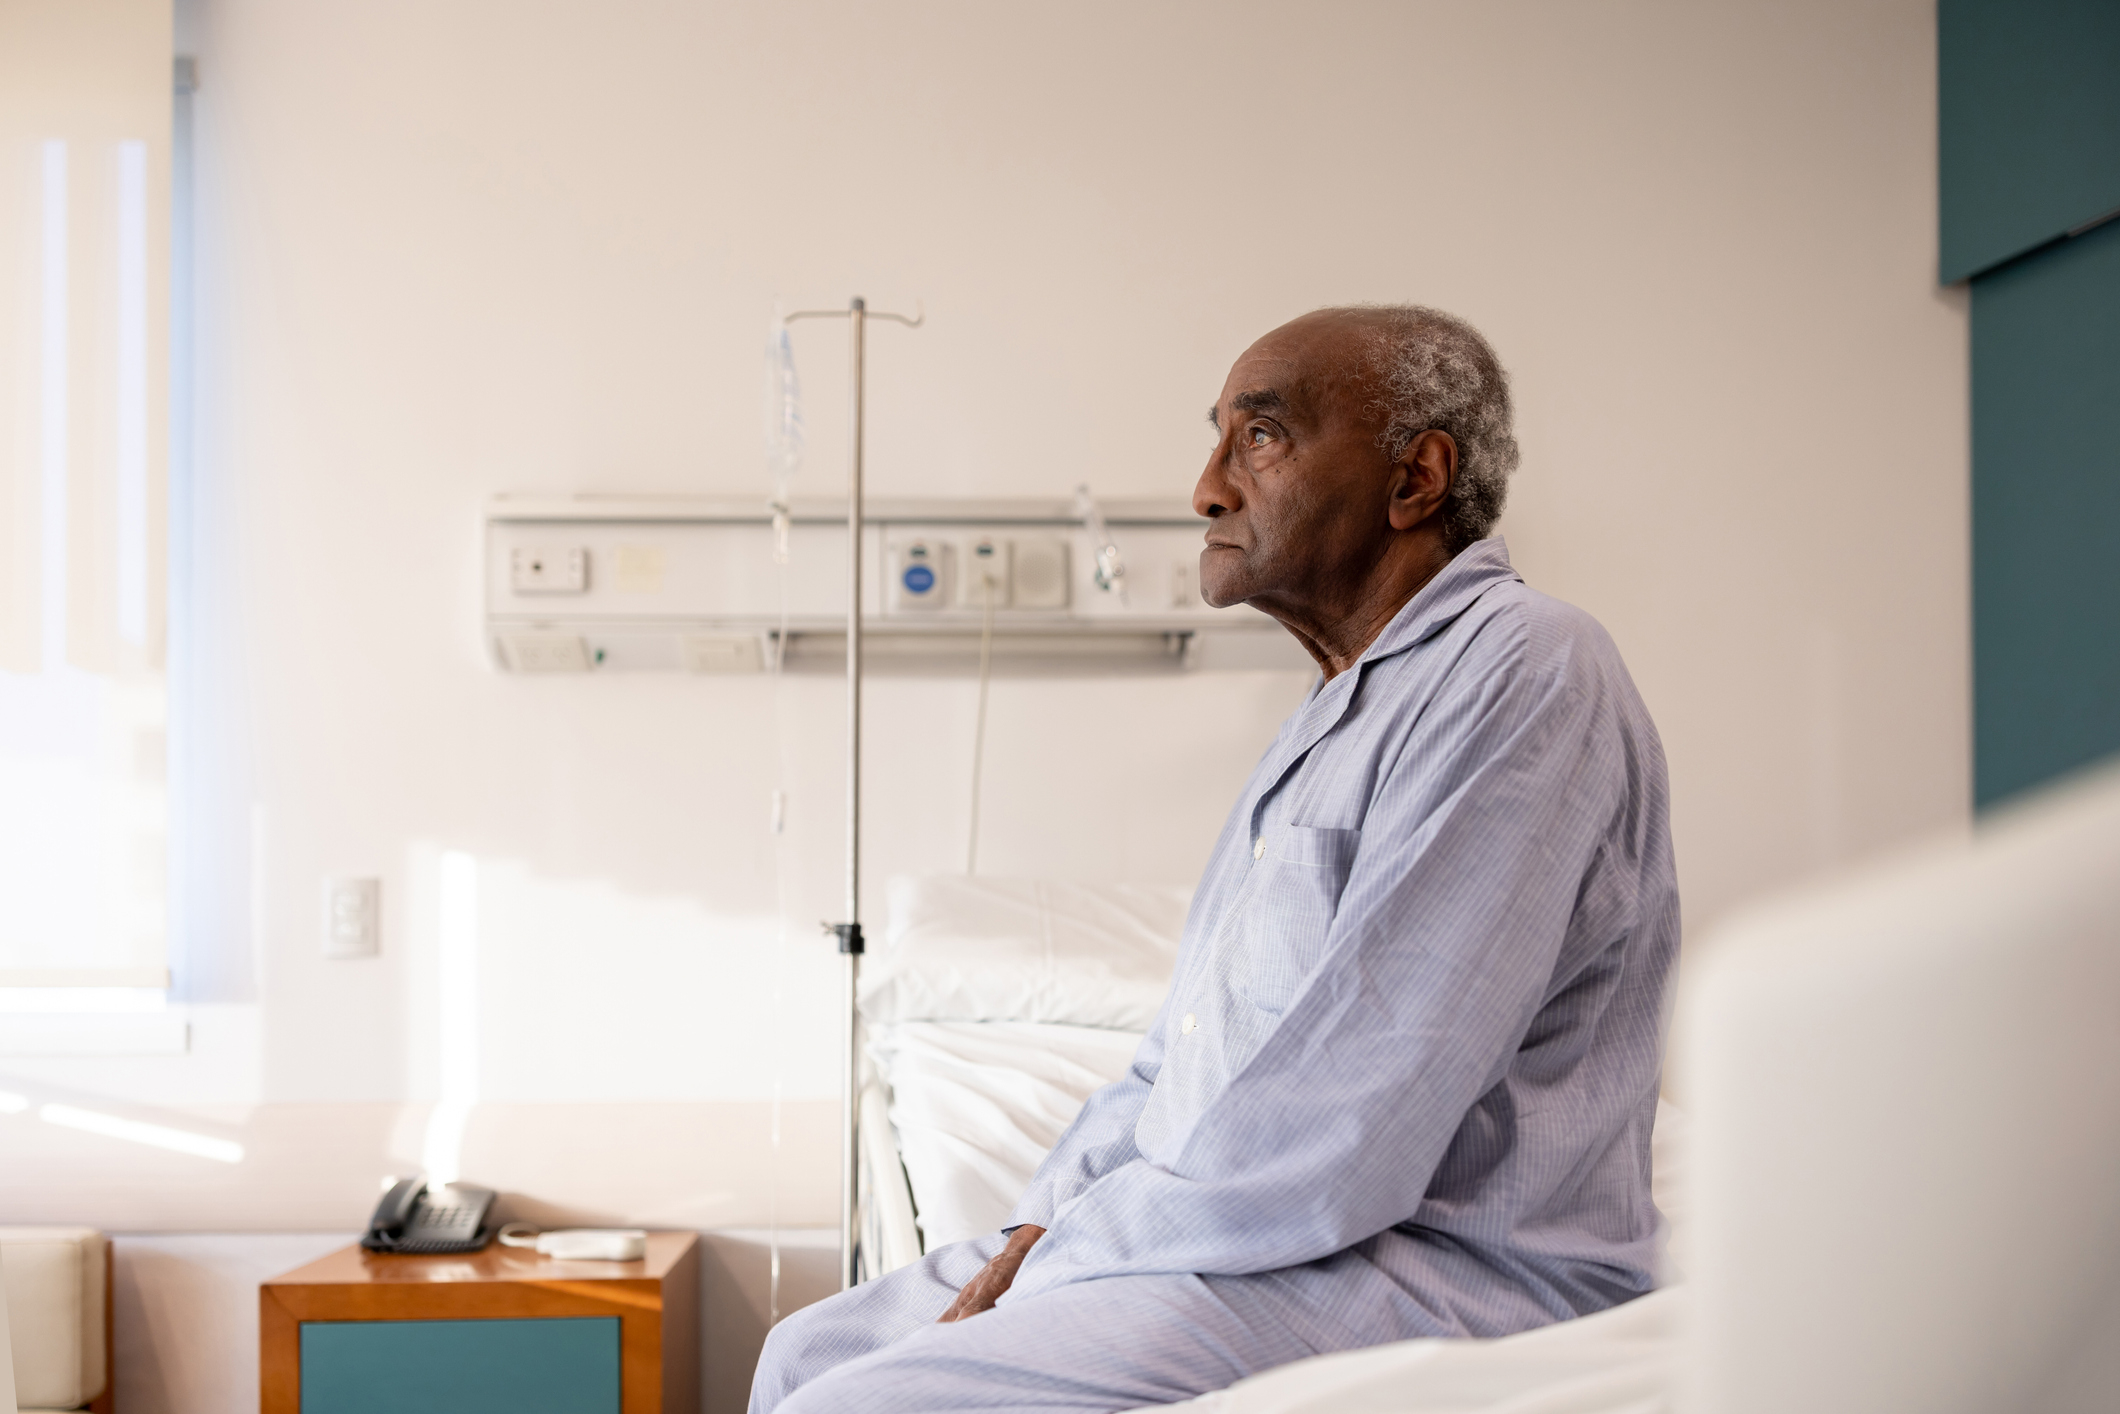 Older man in a hospital gown seated on a bed, looking thoughtful, in a hospital room